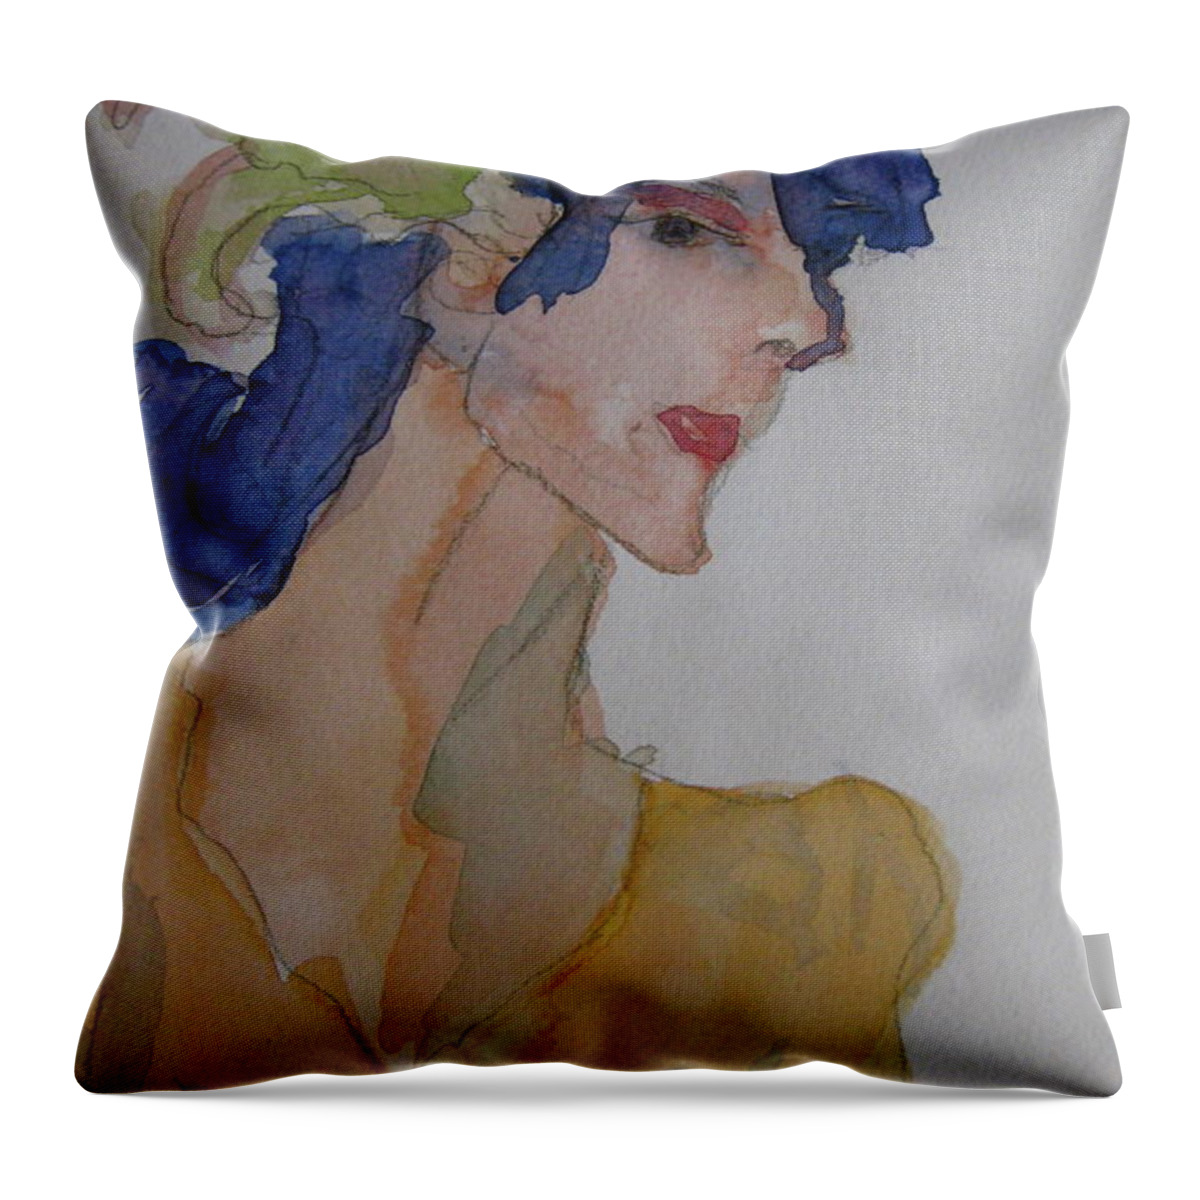 Woman Throw Pillow featuring the painting Rita's Recital by Beverley Harper Tinsley